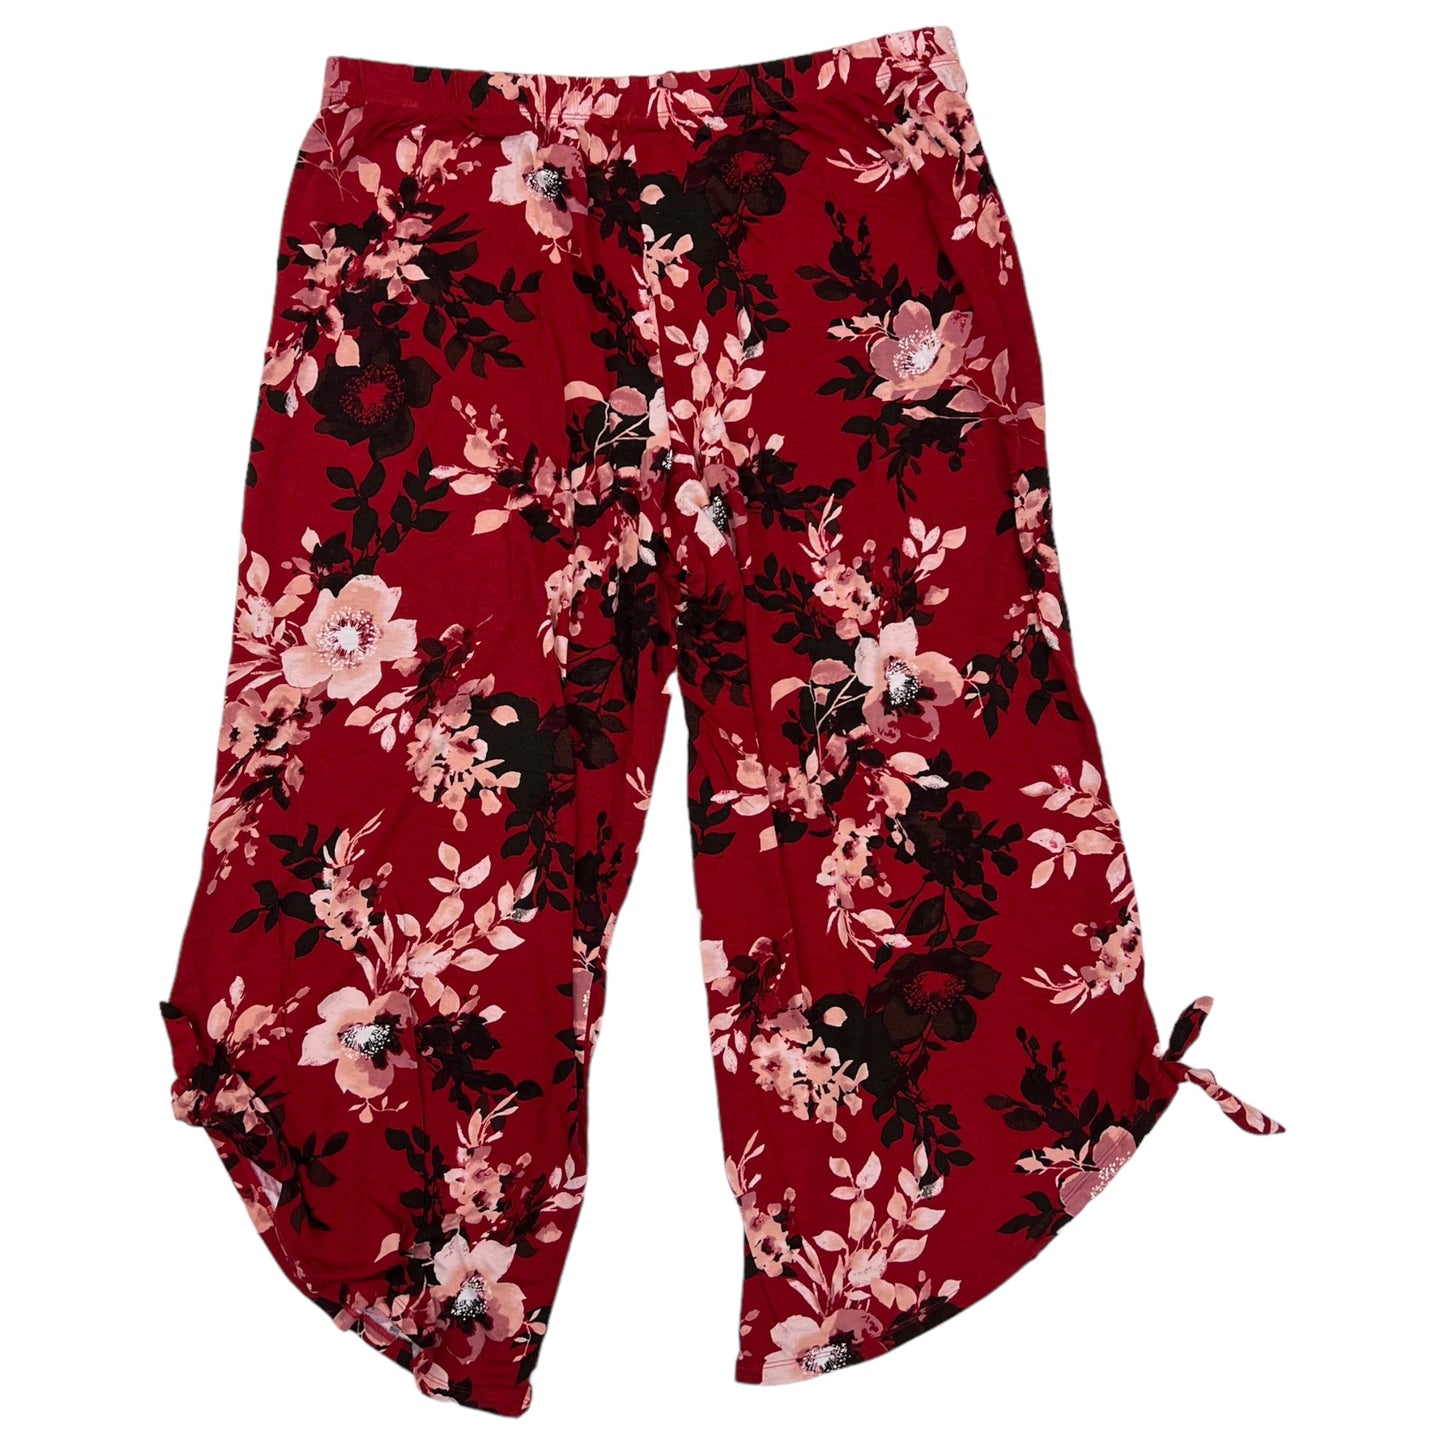 Pajama Pants By Cato  Size: 1x